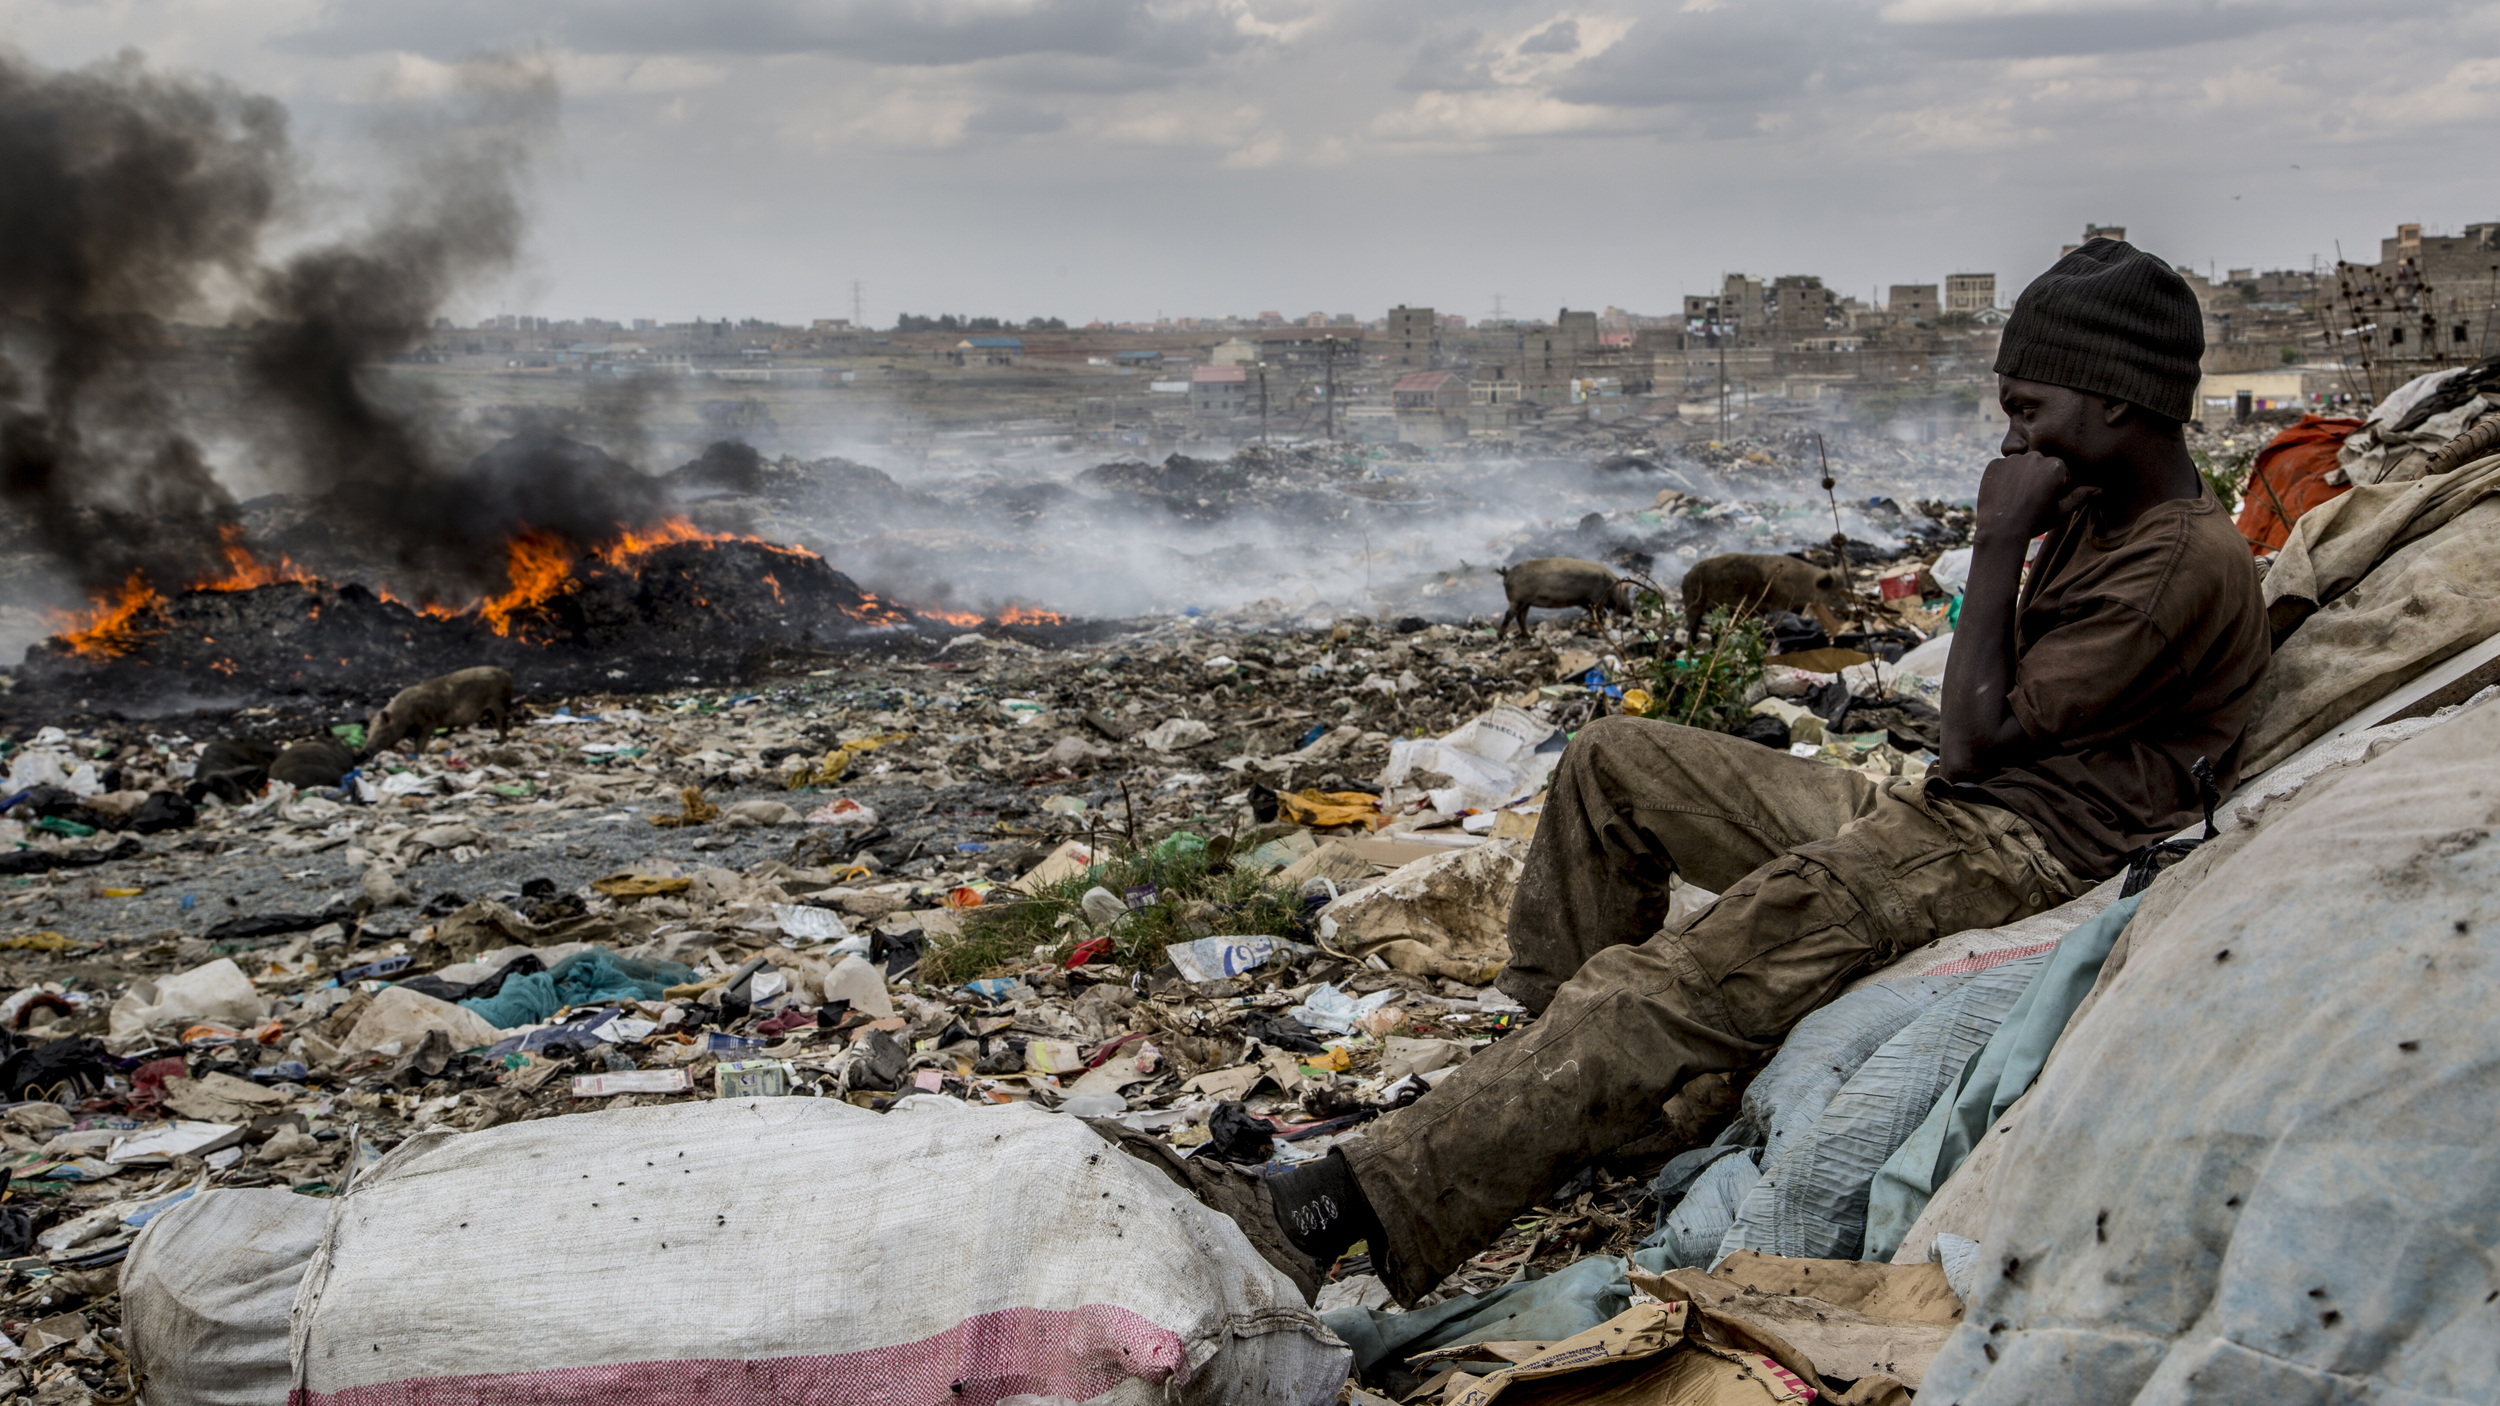  Benson Mumo Muli, 21, watches over a fellow colleague's cache as a mound of trash burns in the background. Benson has been sorting and selling plastics at the site for the past two years. He also fashions what appeared to be reams of plastic (think 